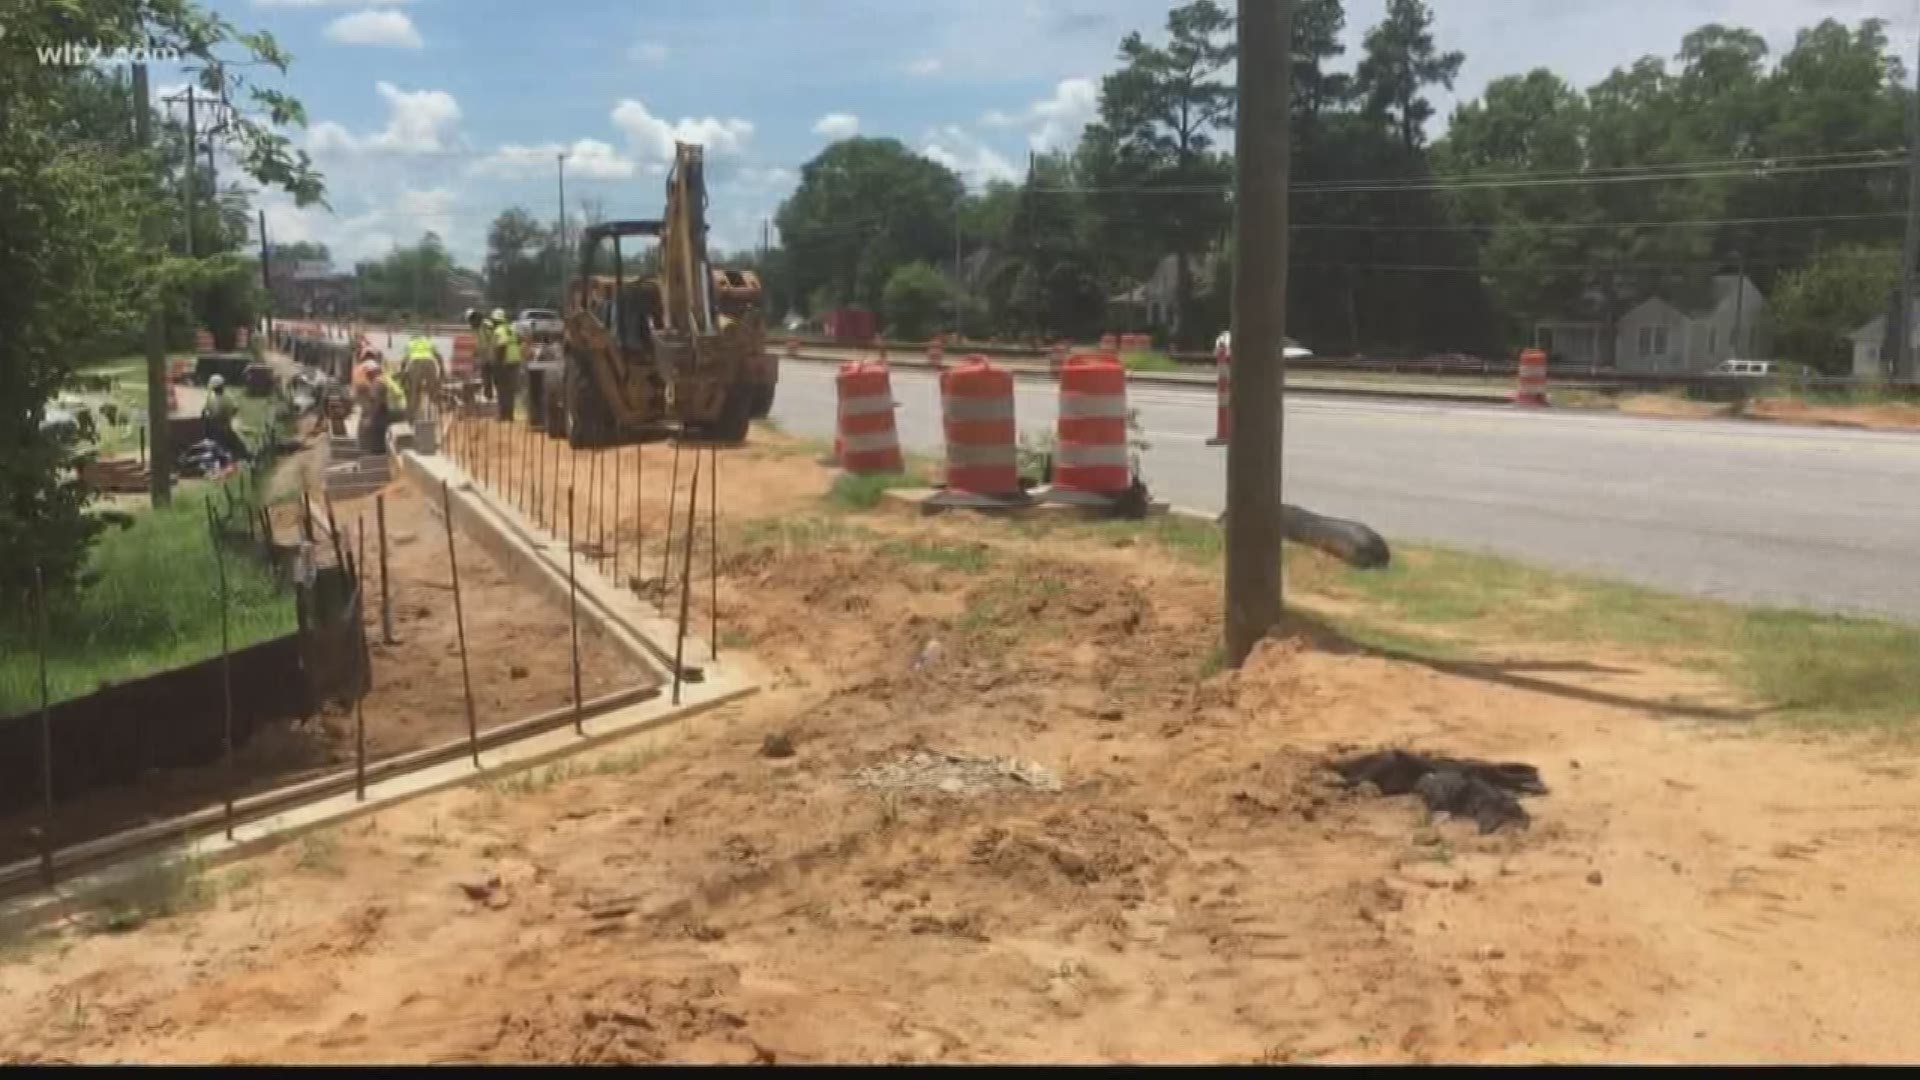 The new intersection in Orangeburg should allow easier access for drivers into Claflin University and SC State.